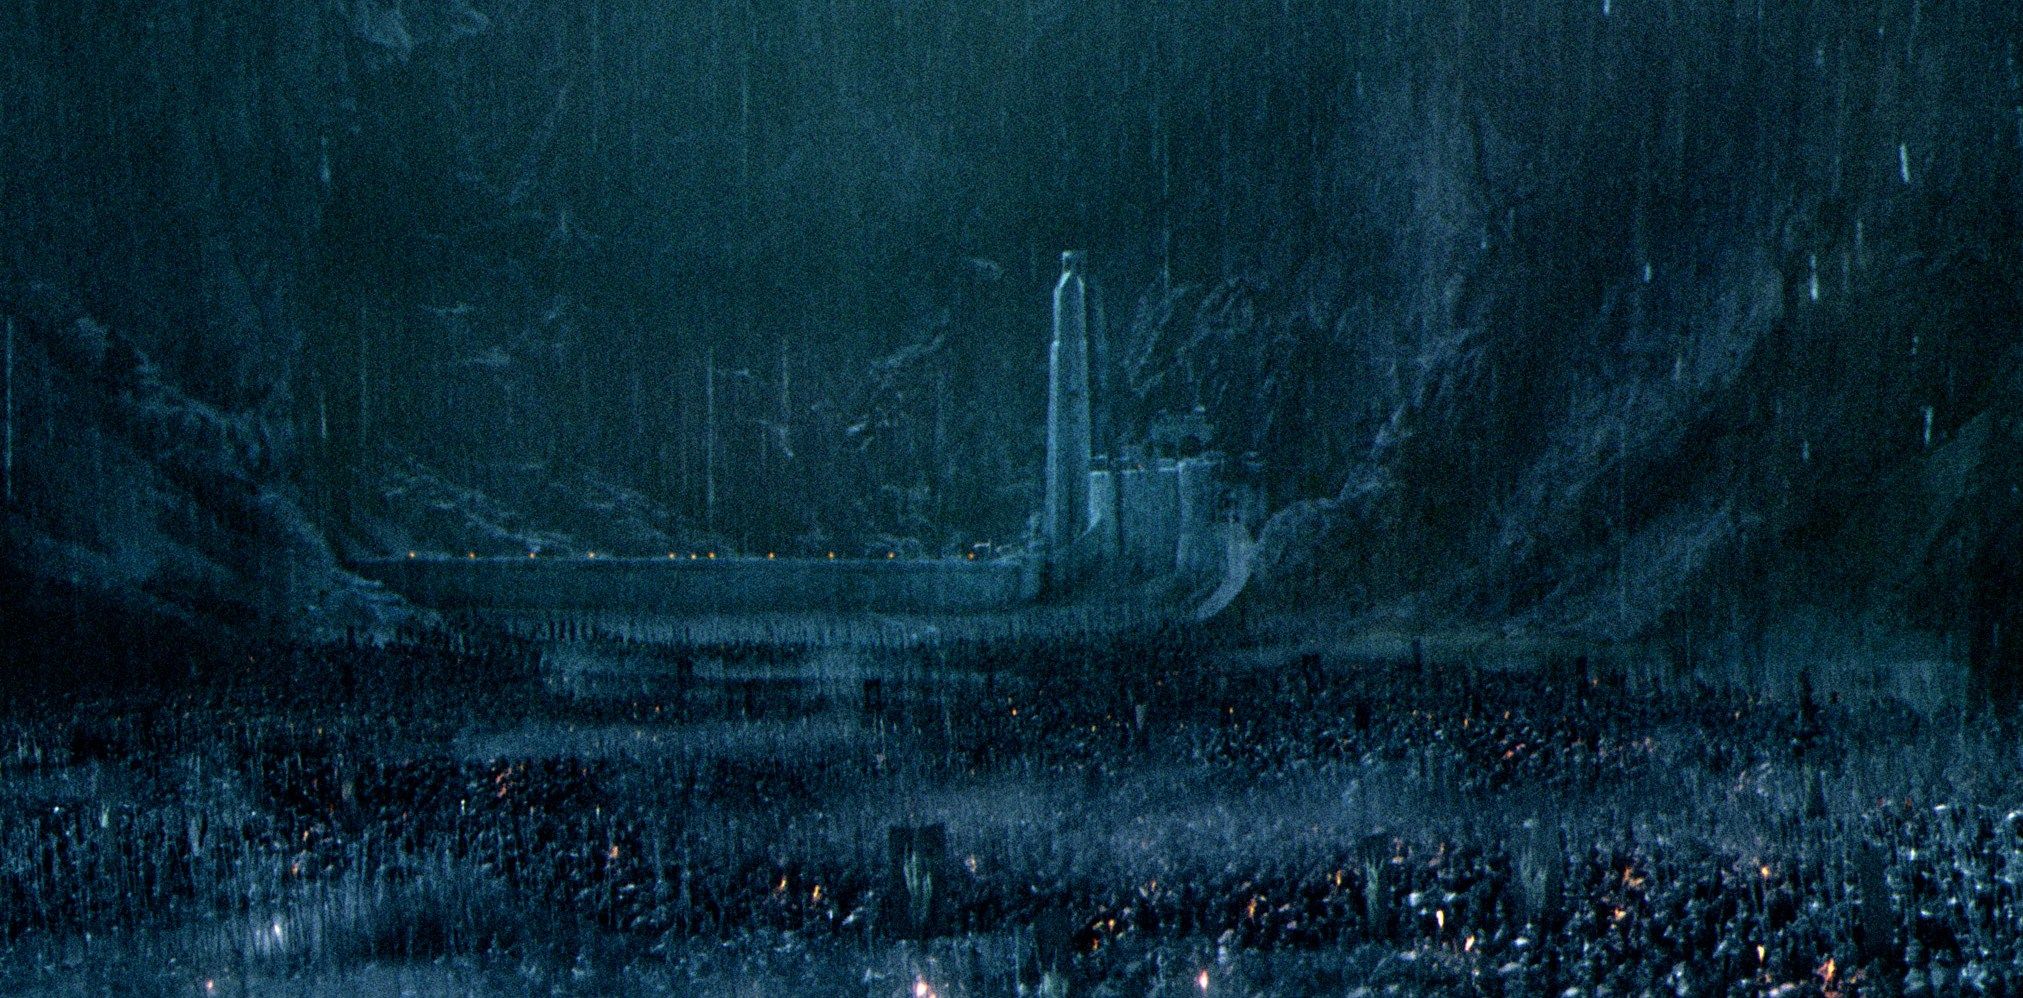 Helm's deep battle from The Two Towers